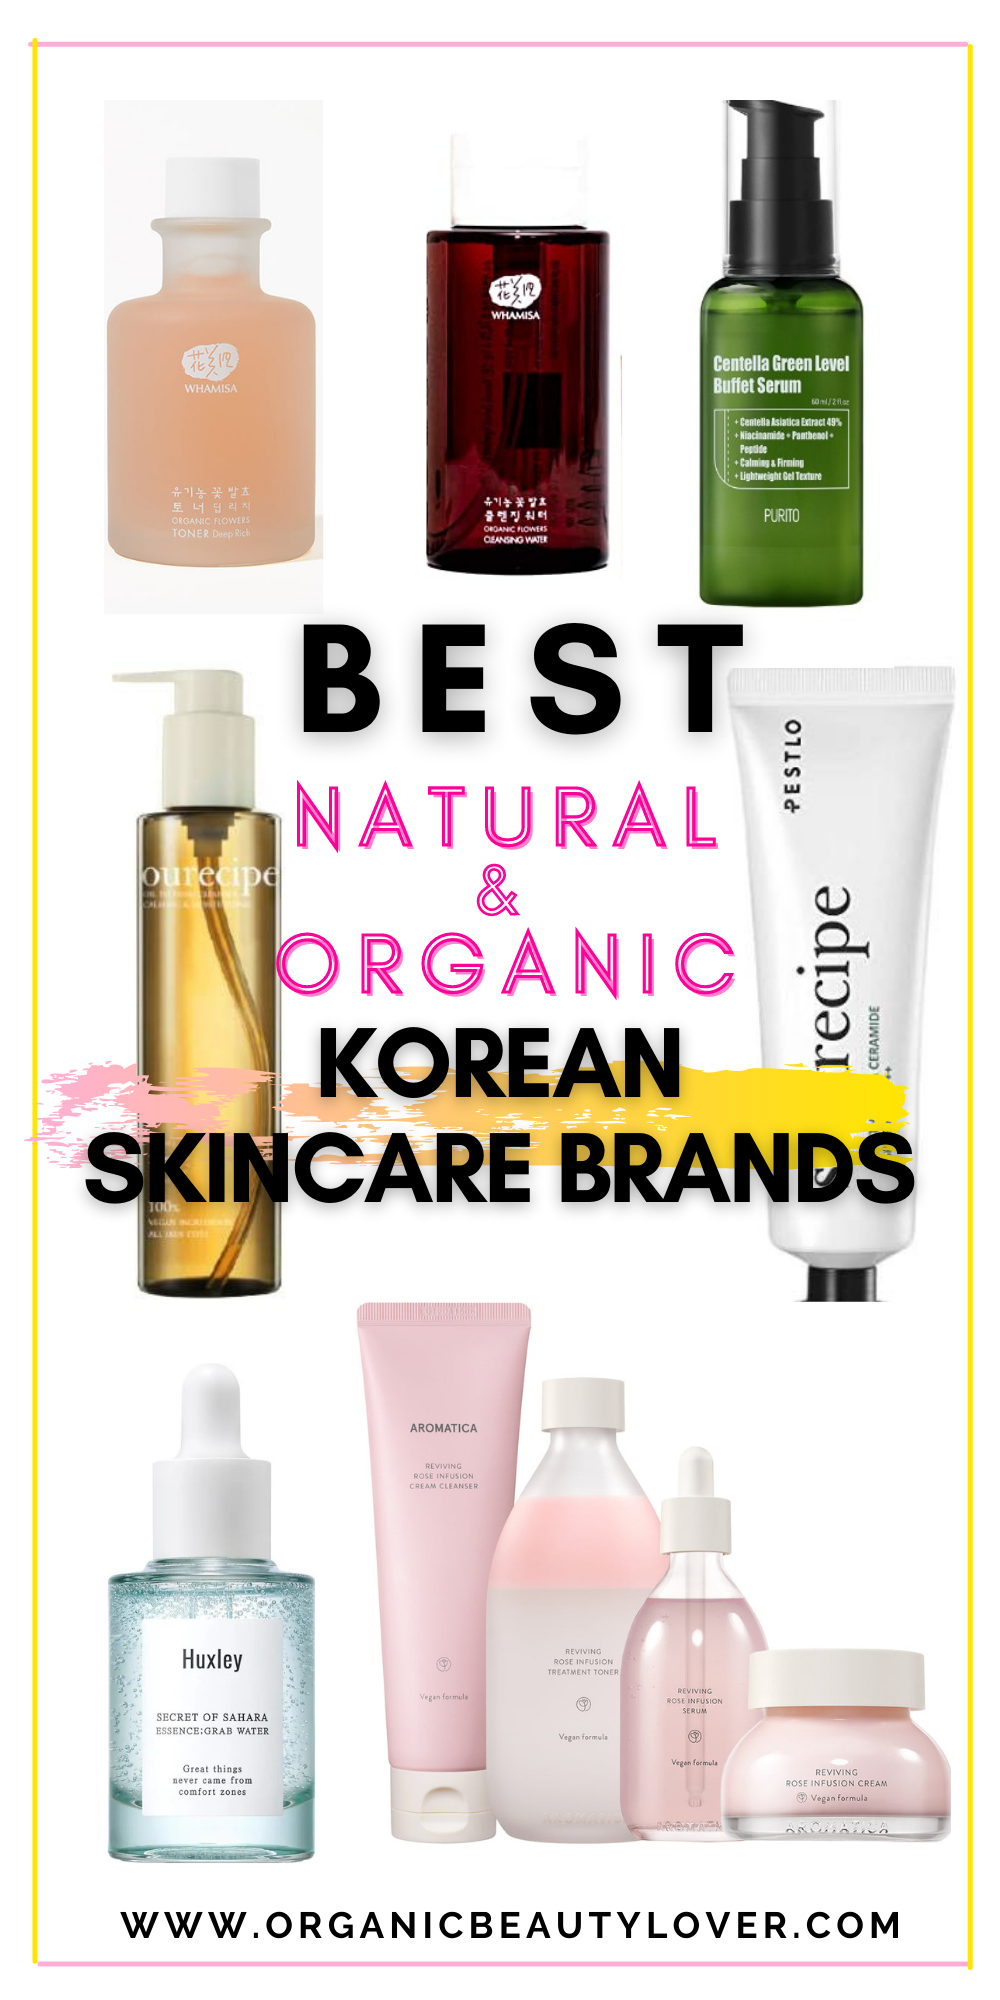 25 Best Asian Skin Care Products & Brands 2022 for Clear, Dewy